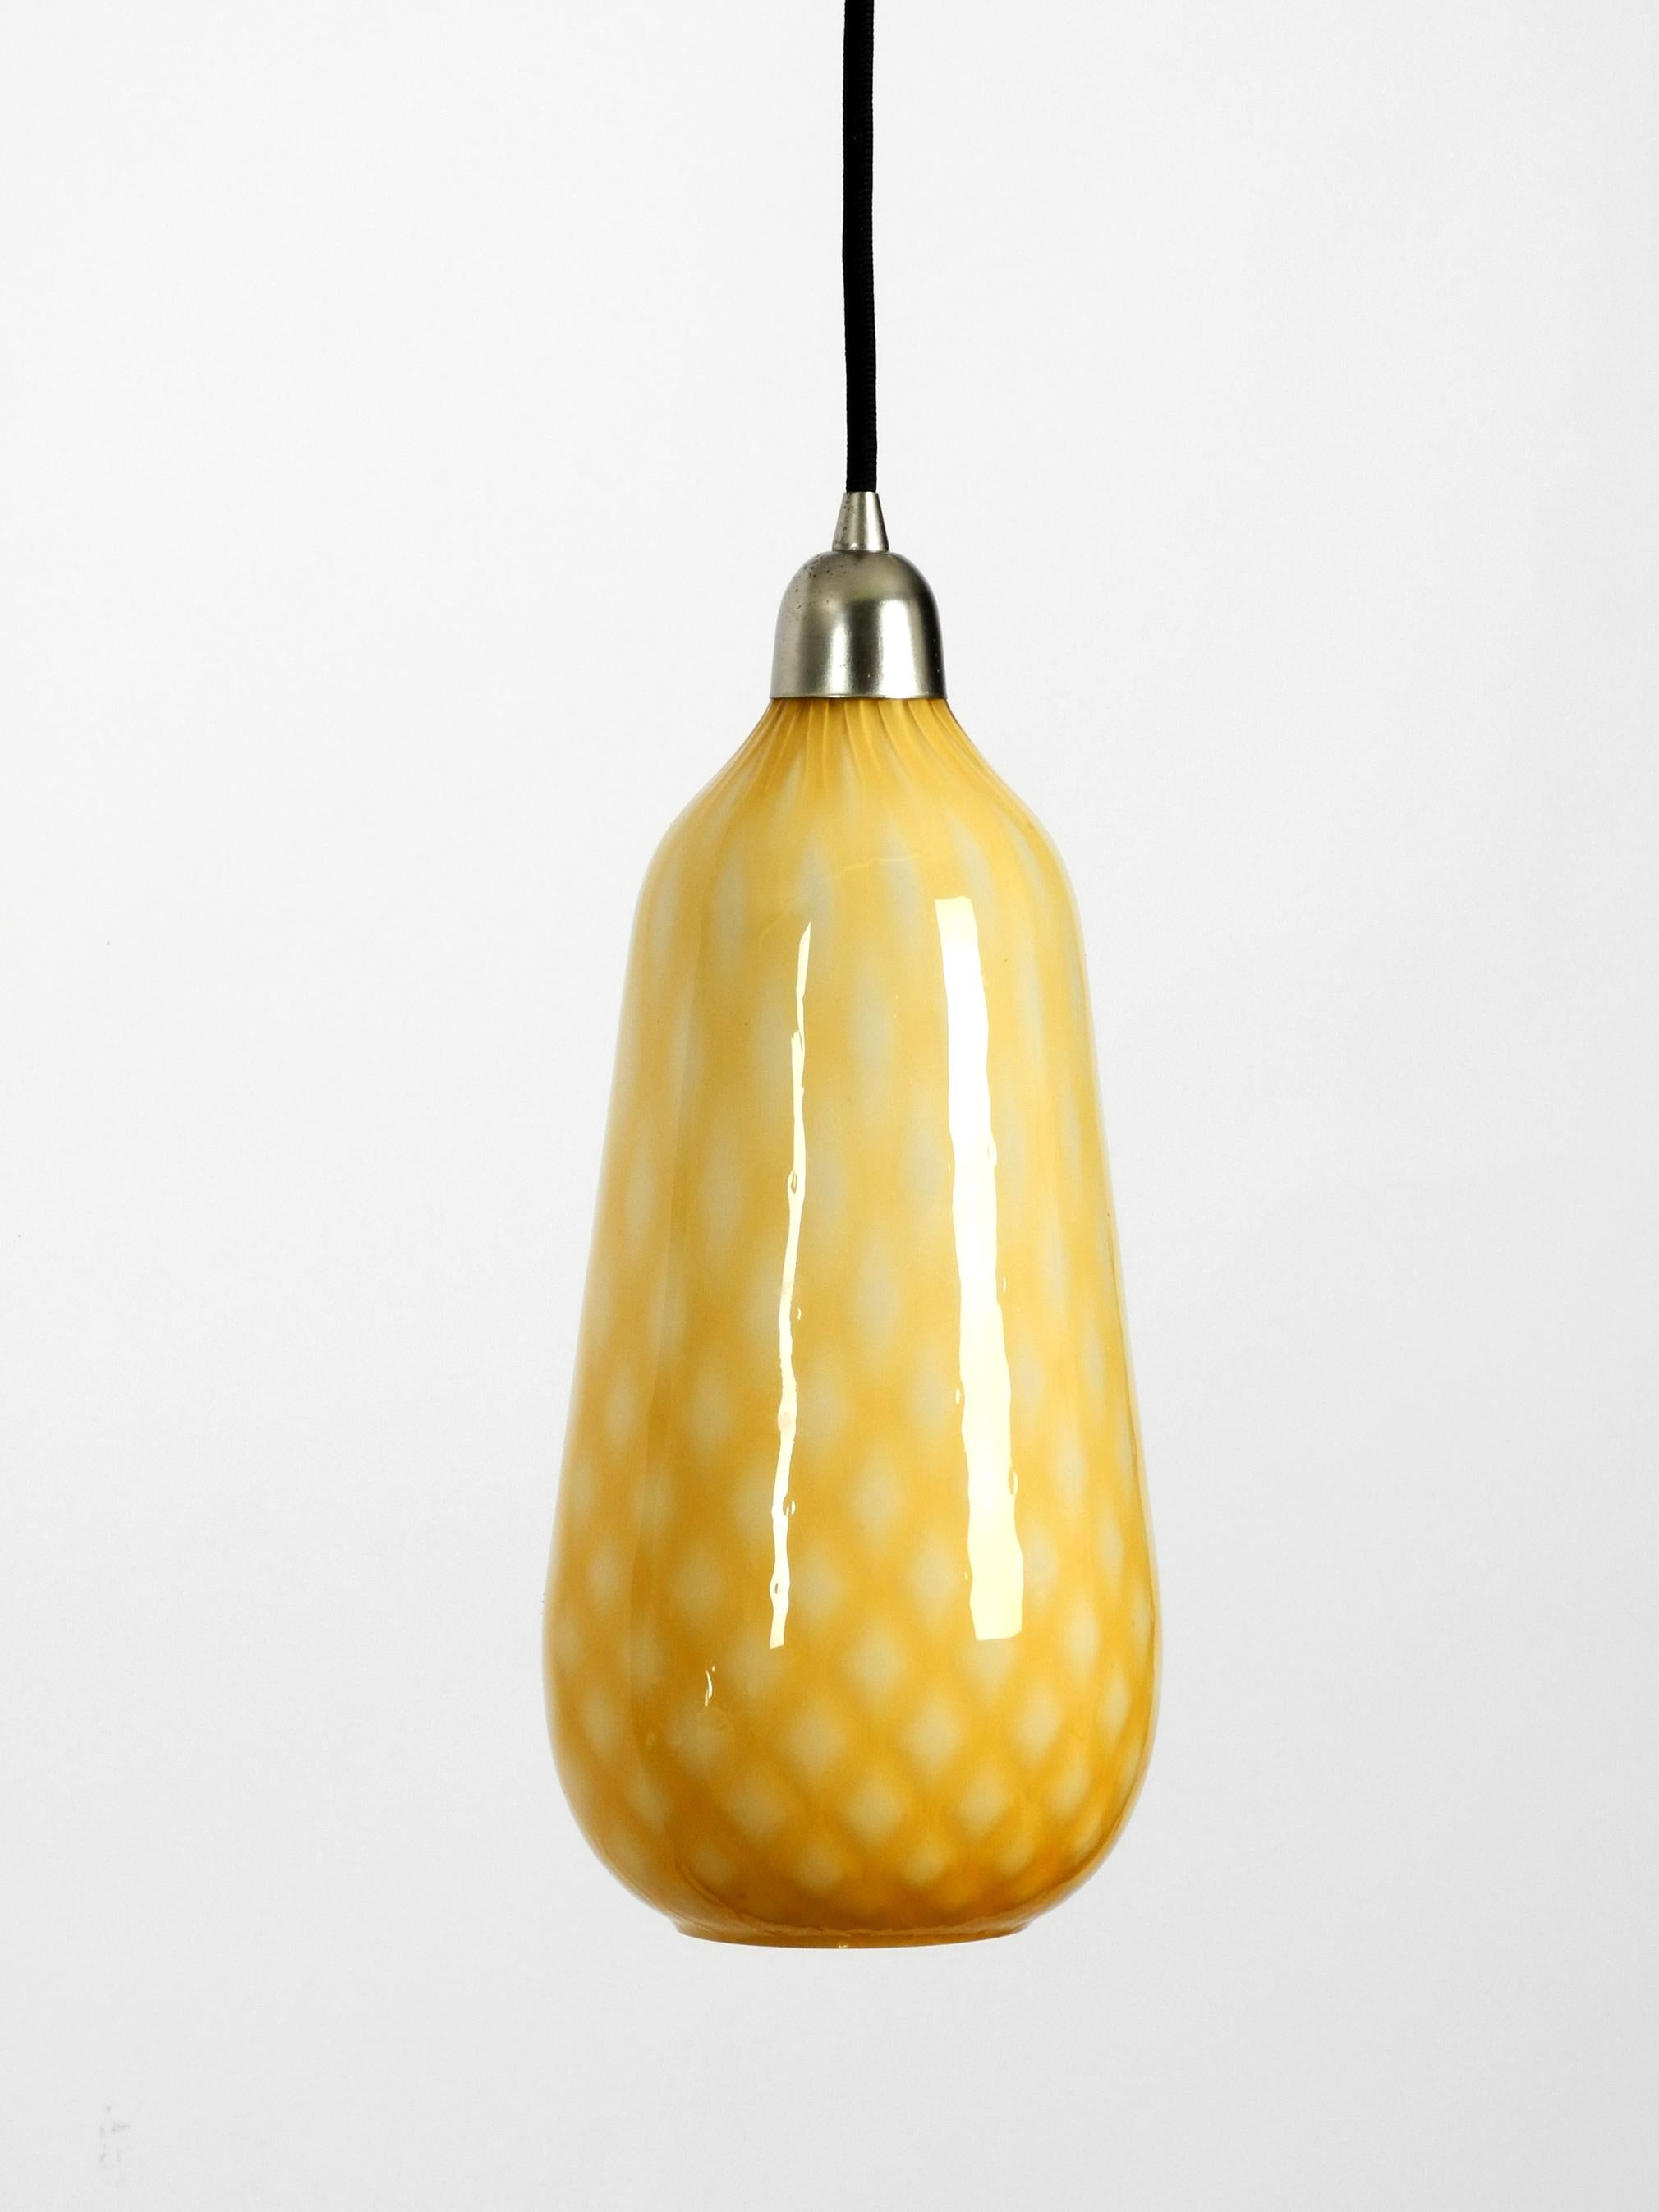 Beautiful yellow and white Italian midcentury Murano glass pendant lamp
in rare design with a checked pattern. Fantastically beautiful and very noble design
in a very good vintage condition. Lampshade is made of Muarnoglas inside white.
Made in